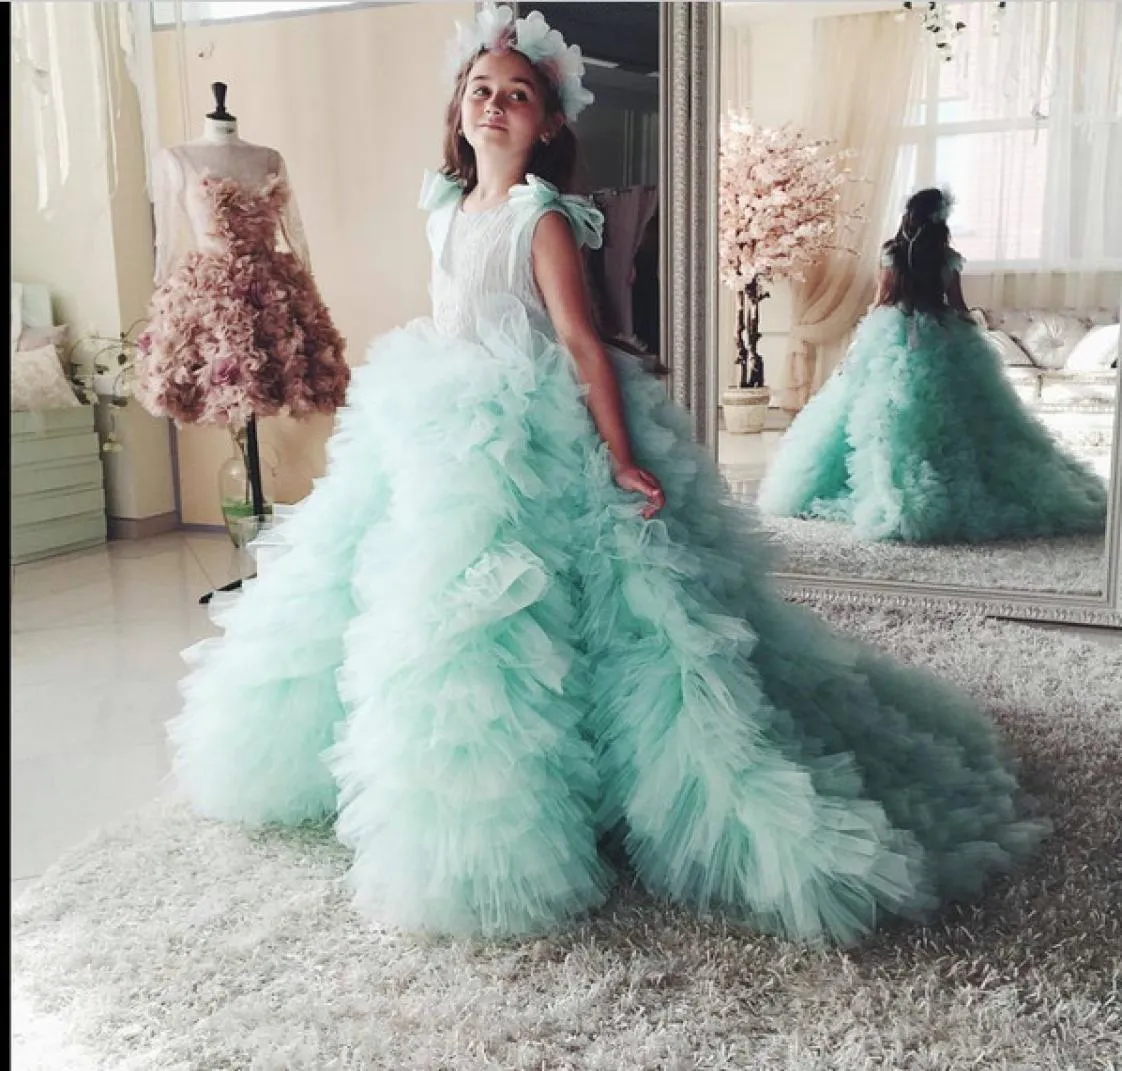 Custom Made Flower Girl Pageant Dresses For Girls Glitz Court Train Tulle kids Prom Dresses With Bow Mint Color Childrens Ball Gow6012348